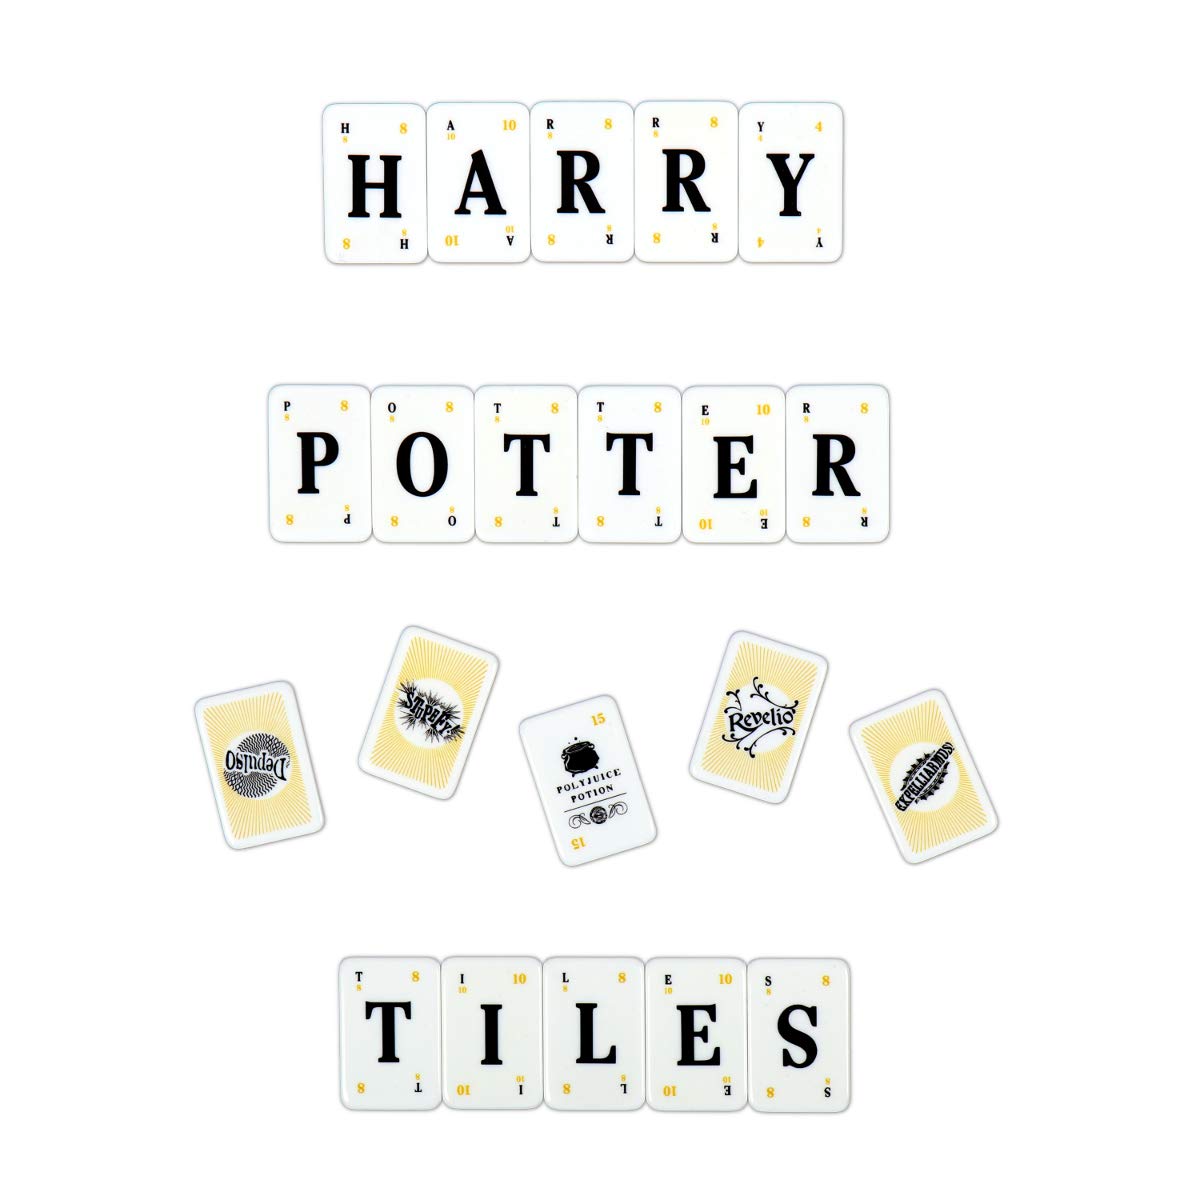 Harry Potter Lexicon-go! Word Game Board Puzzle